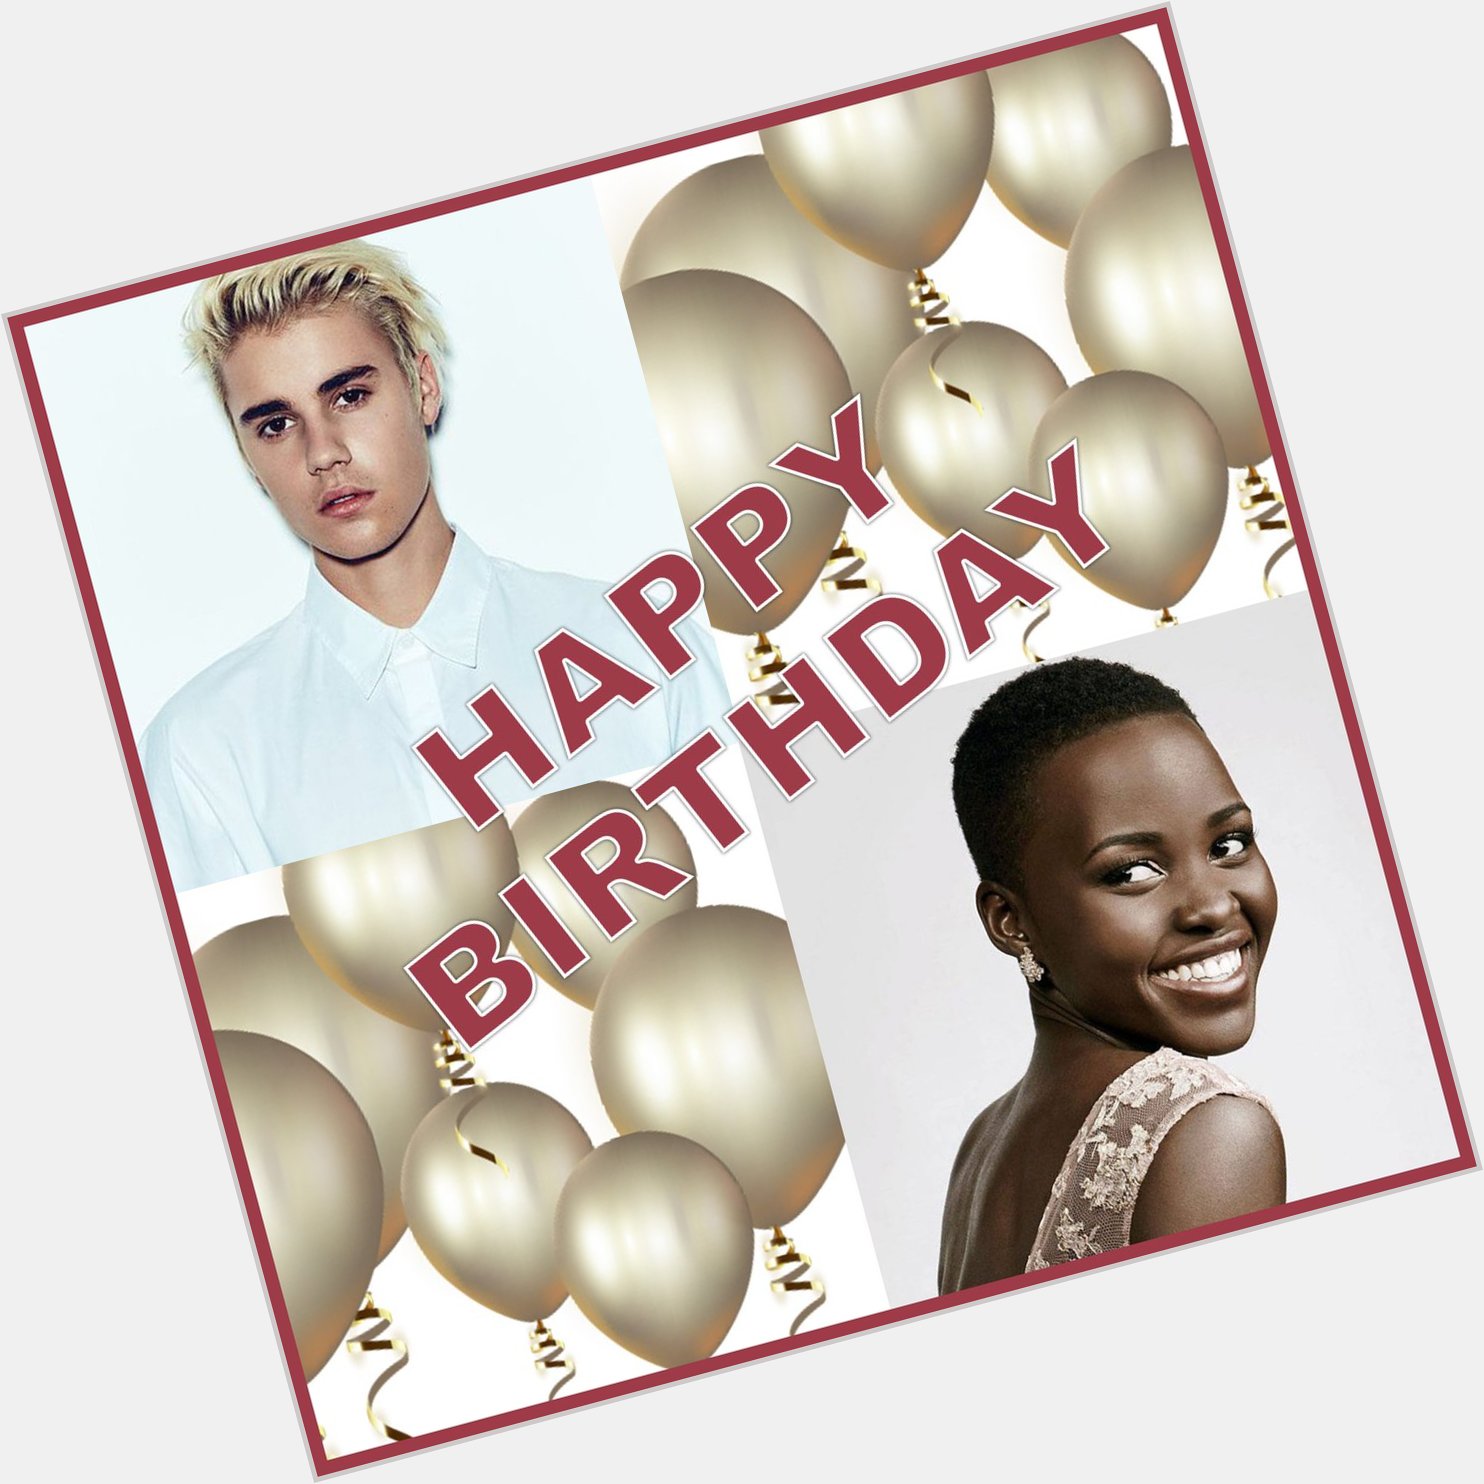 Happy birthday to these two talented stars, Lupita Nyong\o & Justin Bieber! 